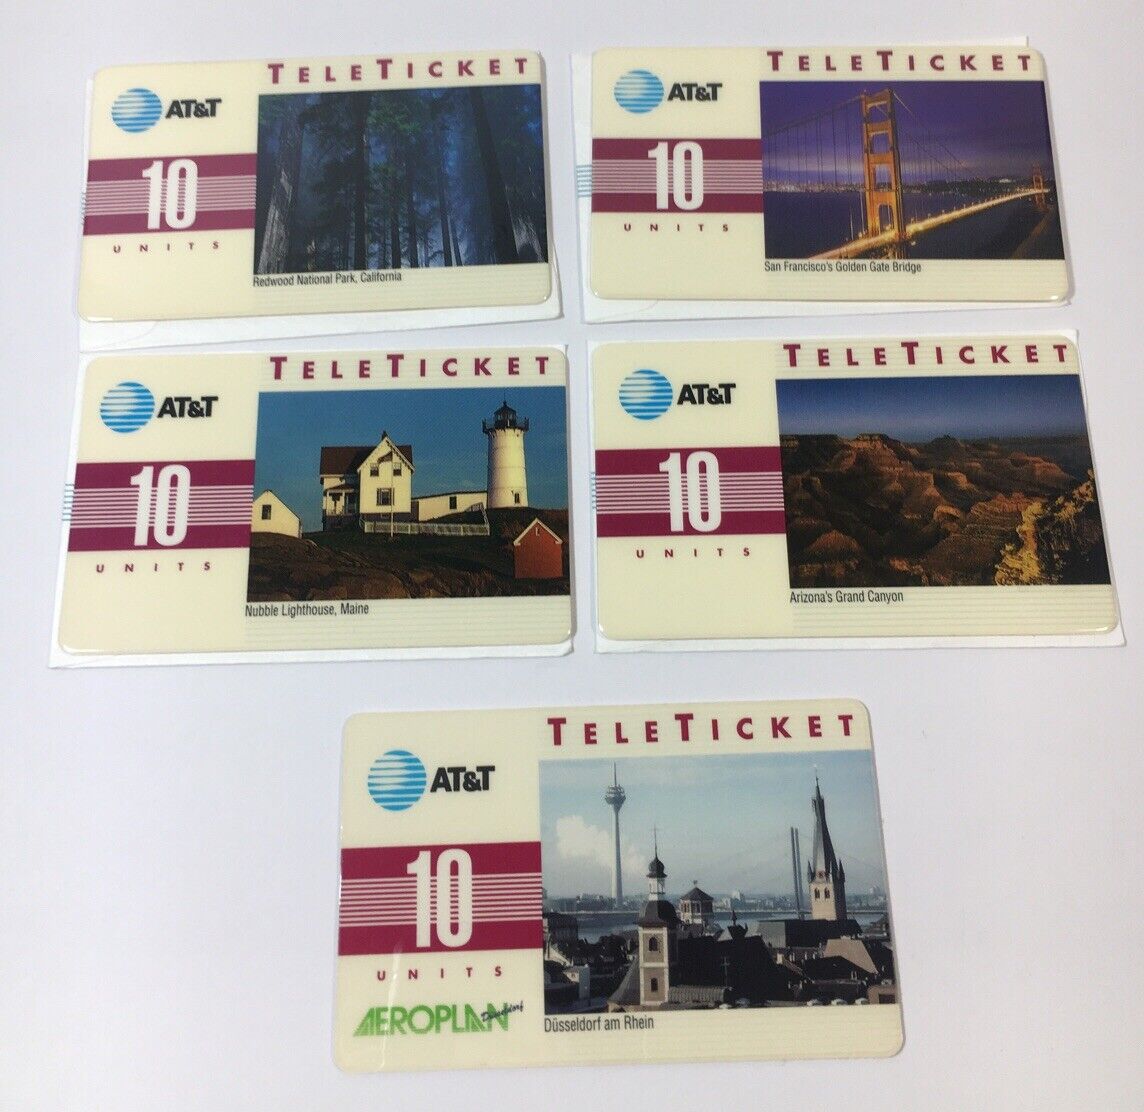 1992 AT&T Teleticket Phone Card Lot Of 5 (7261)